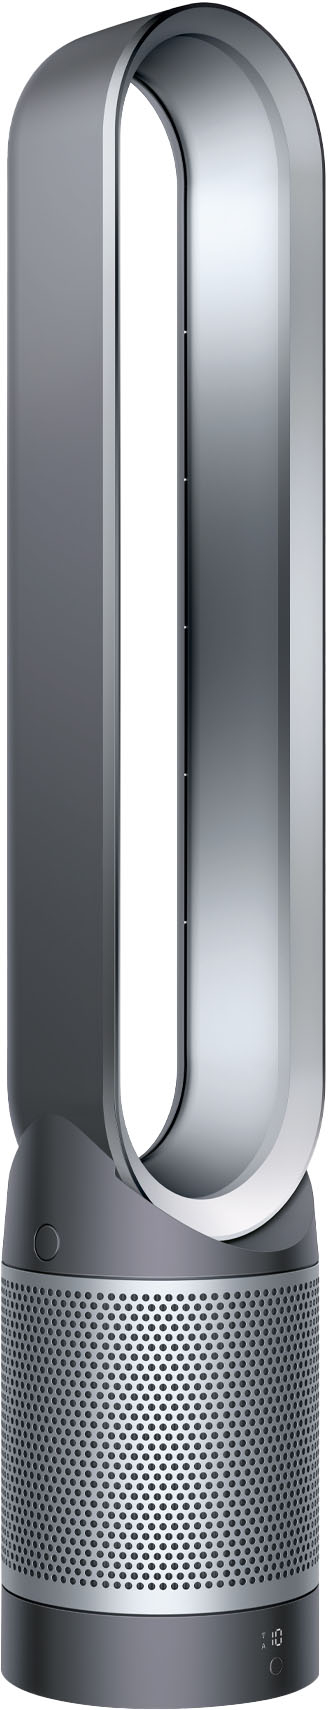 Left View: Dyson - Pure Cool Link - TP02 - Smart Tower Air Purifier and Fan - Ir/Sil